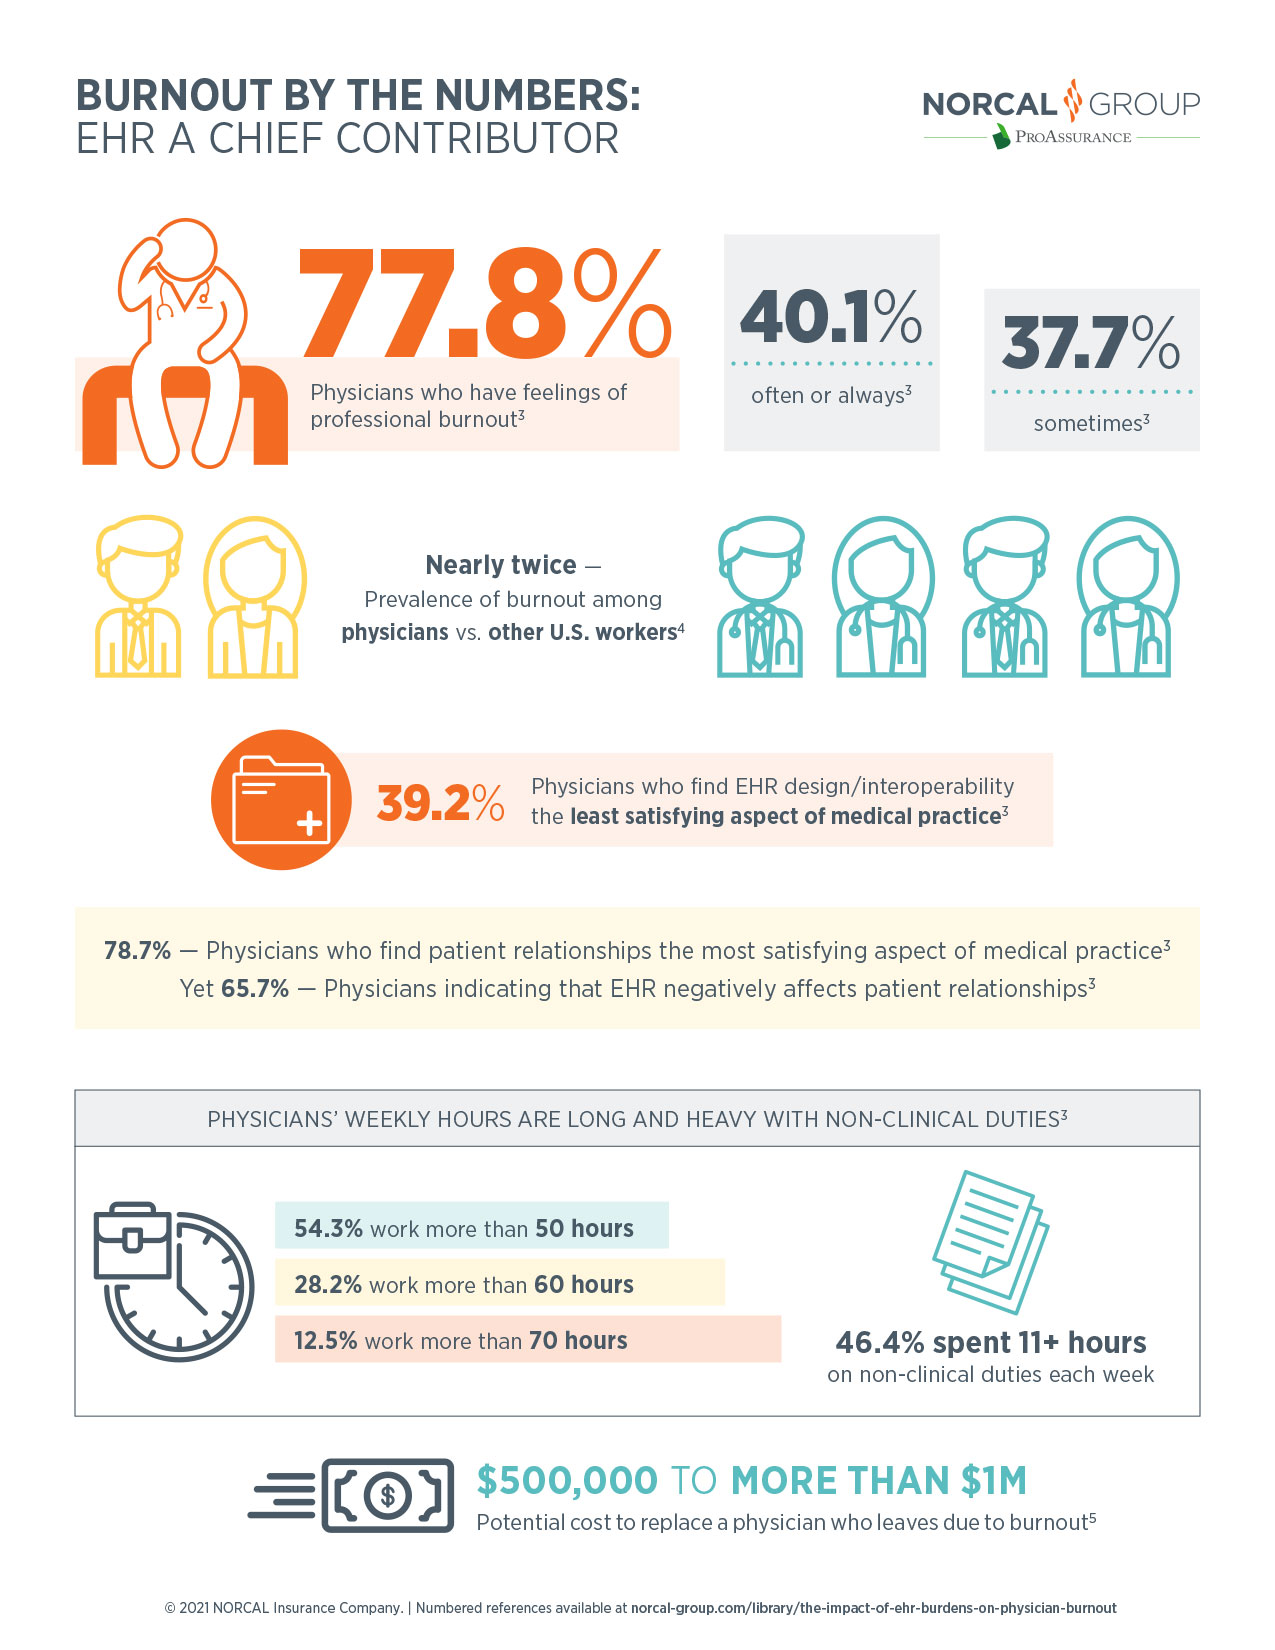 INFOGRAPHIC: EHR a Chief Contributor to Physician Burnout